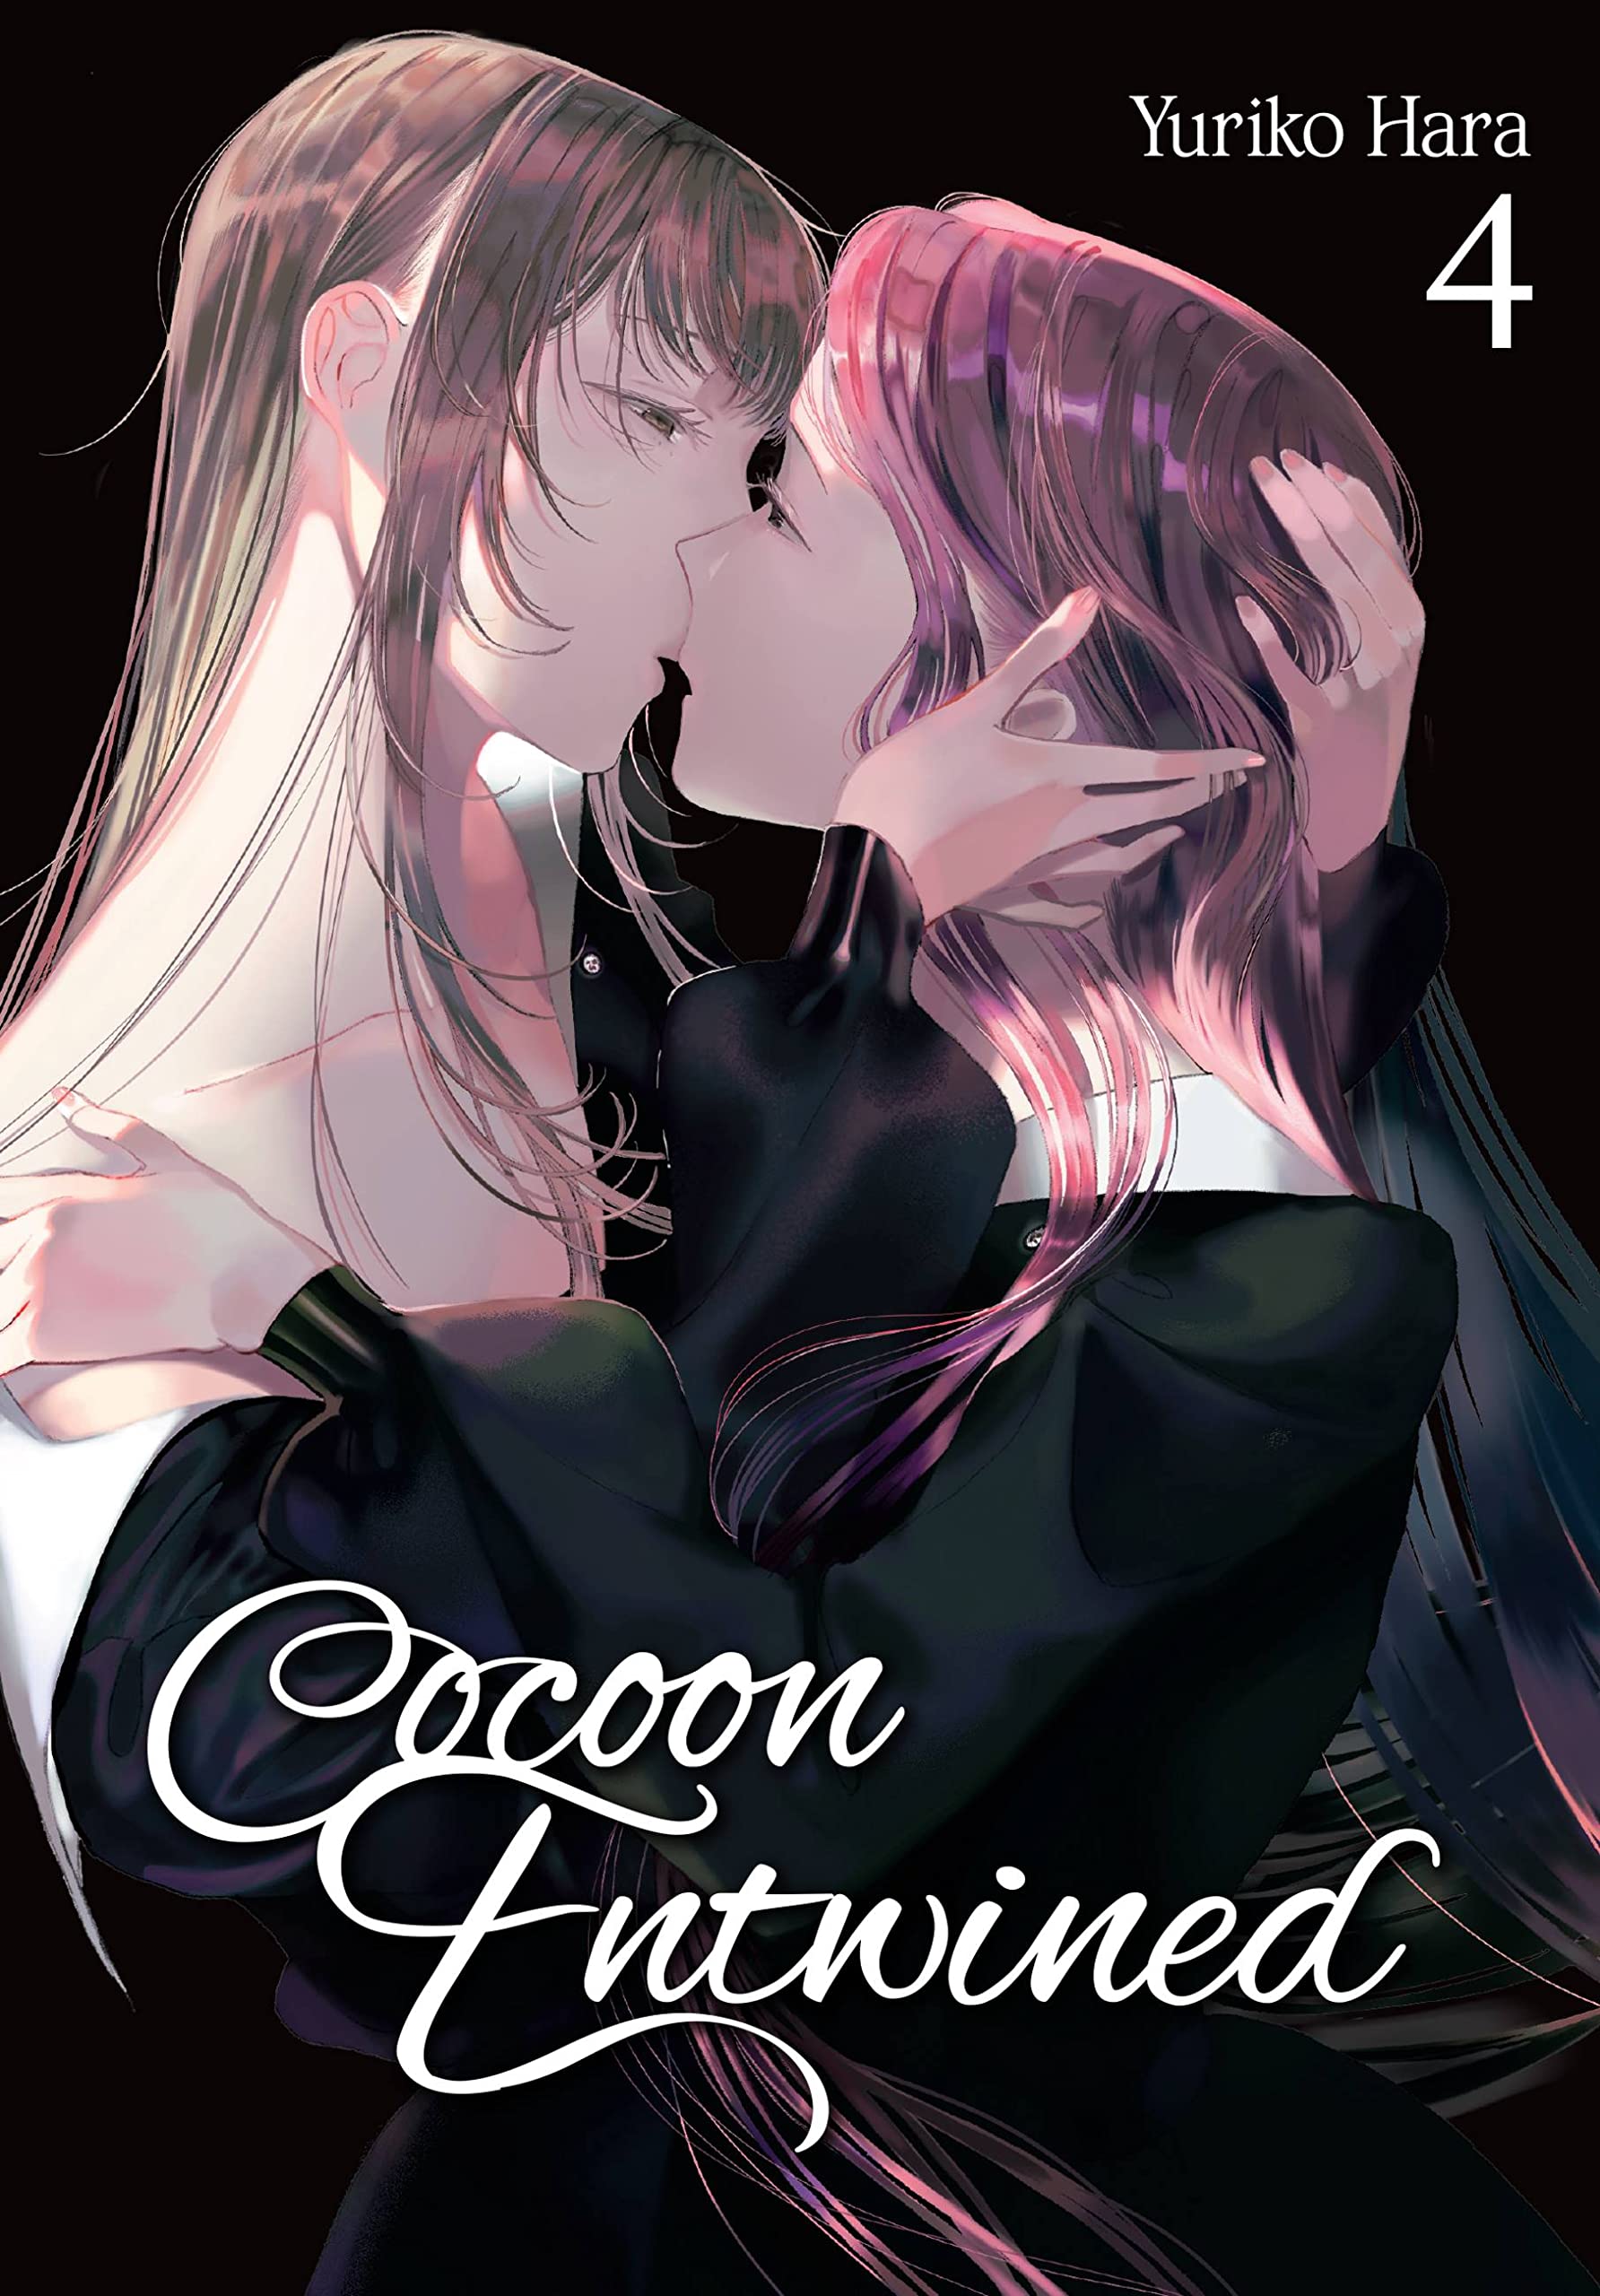 Cocoon Entwined - Volume 4